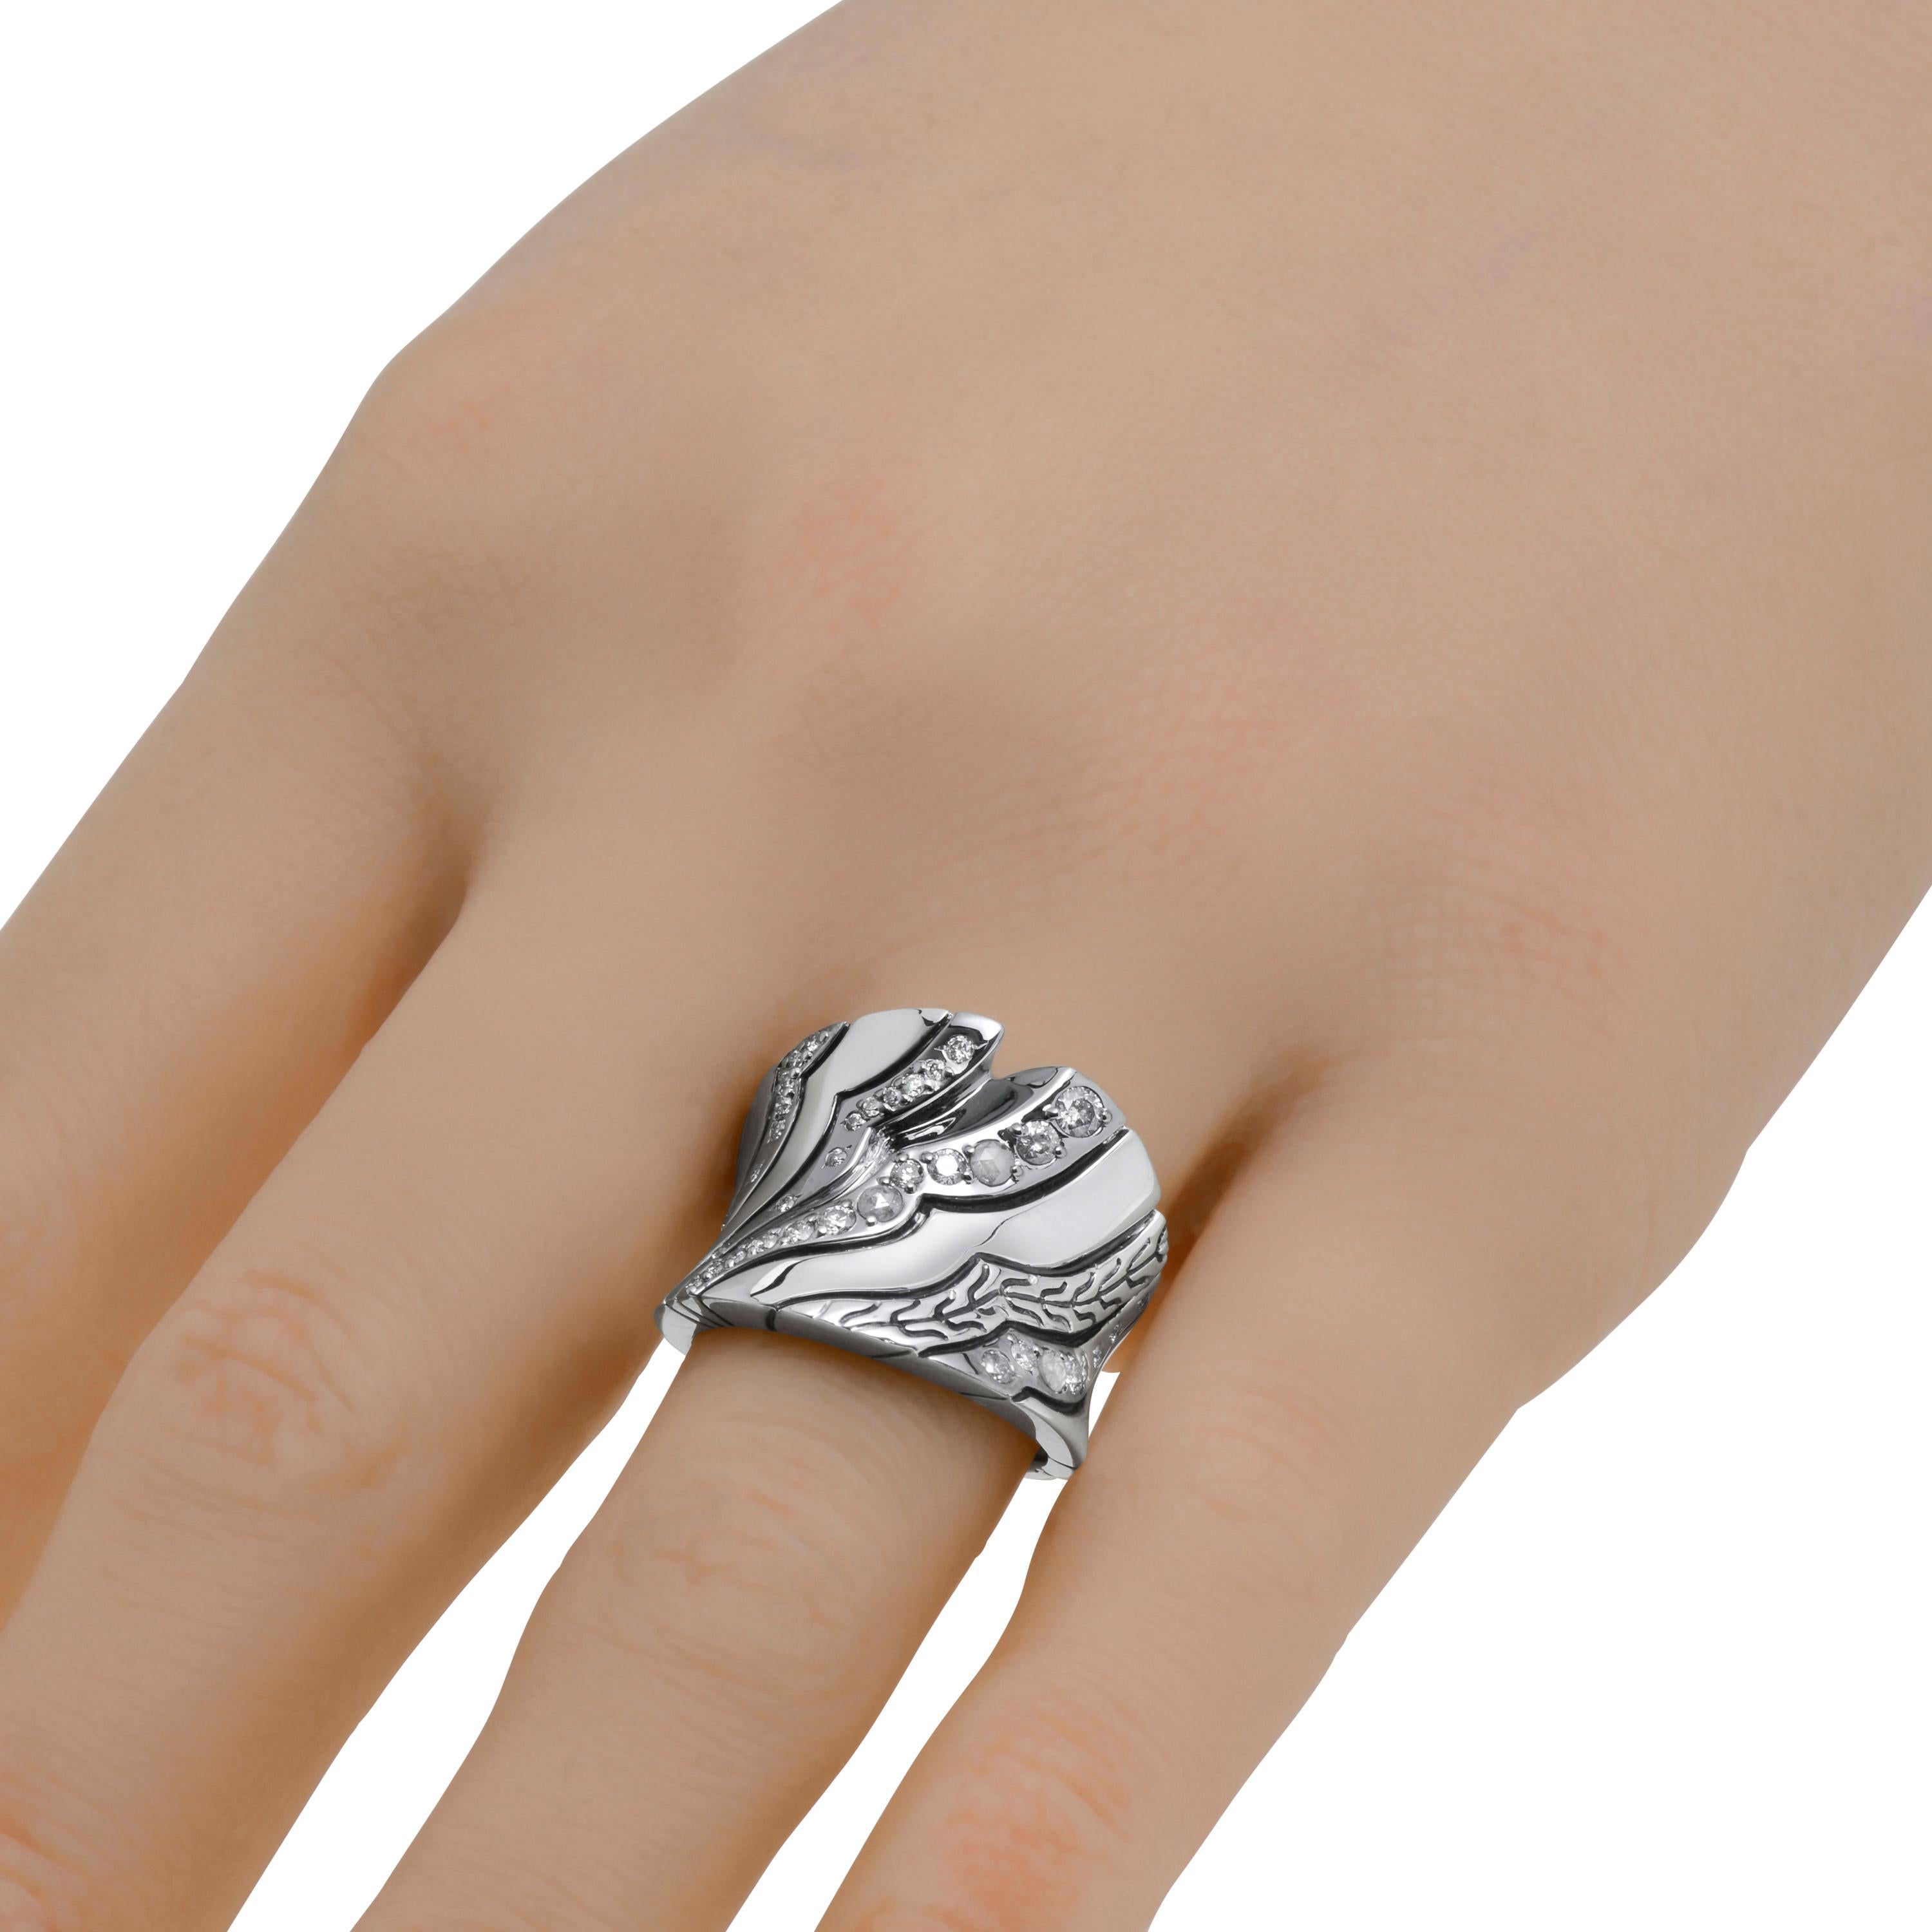 This captivating John Hardy Sterling Silver Saddle Ring features waves of shimmering white diamonds 0.10ct. tw. and Grey diamond pave 0.41ct. tw. accenting a sterling silver band with John Hardy classic chain engravings. Primarily inspired by